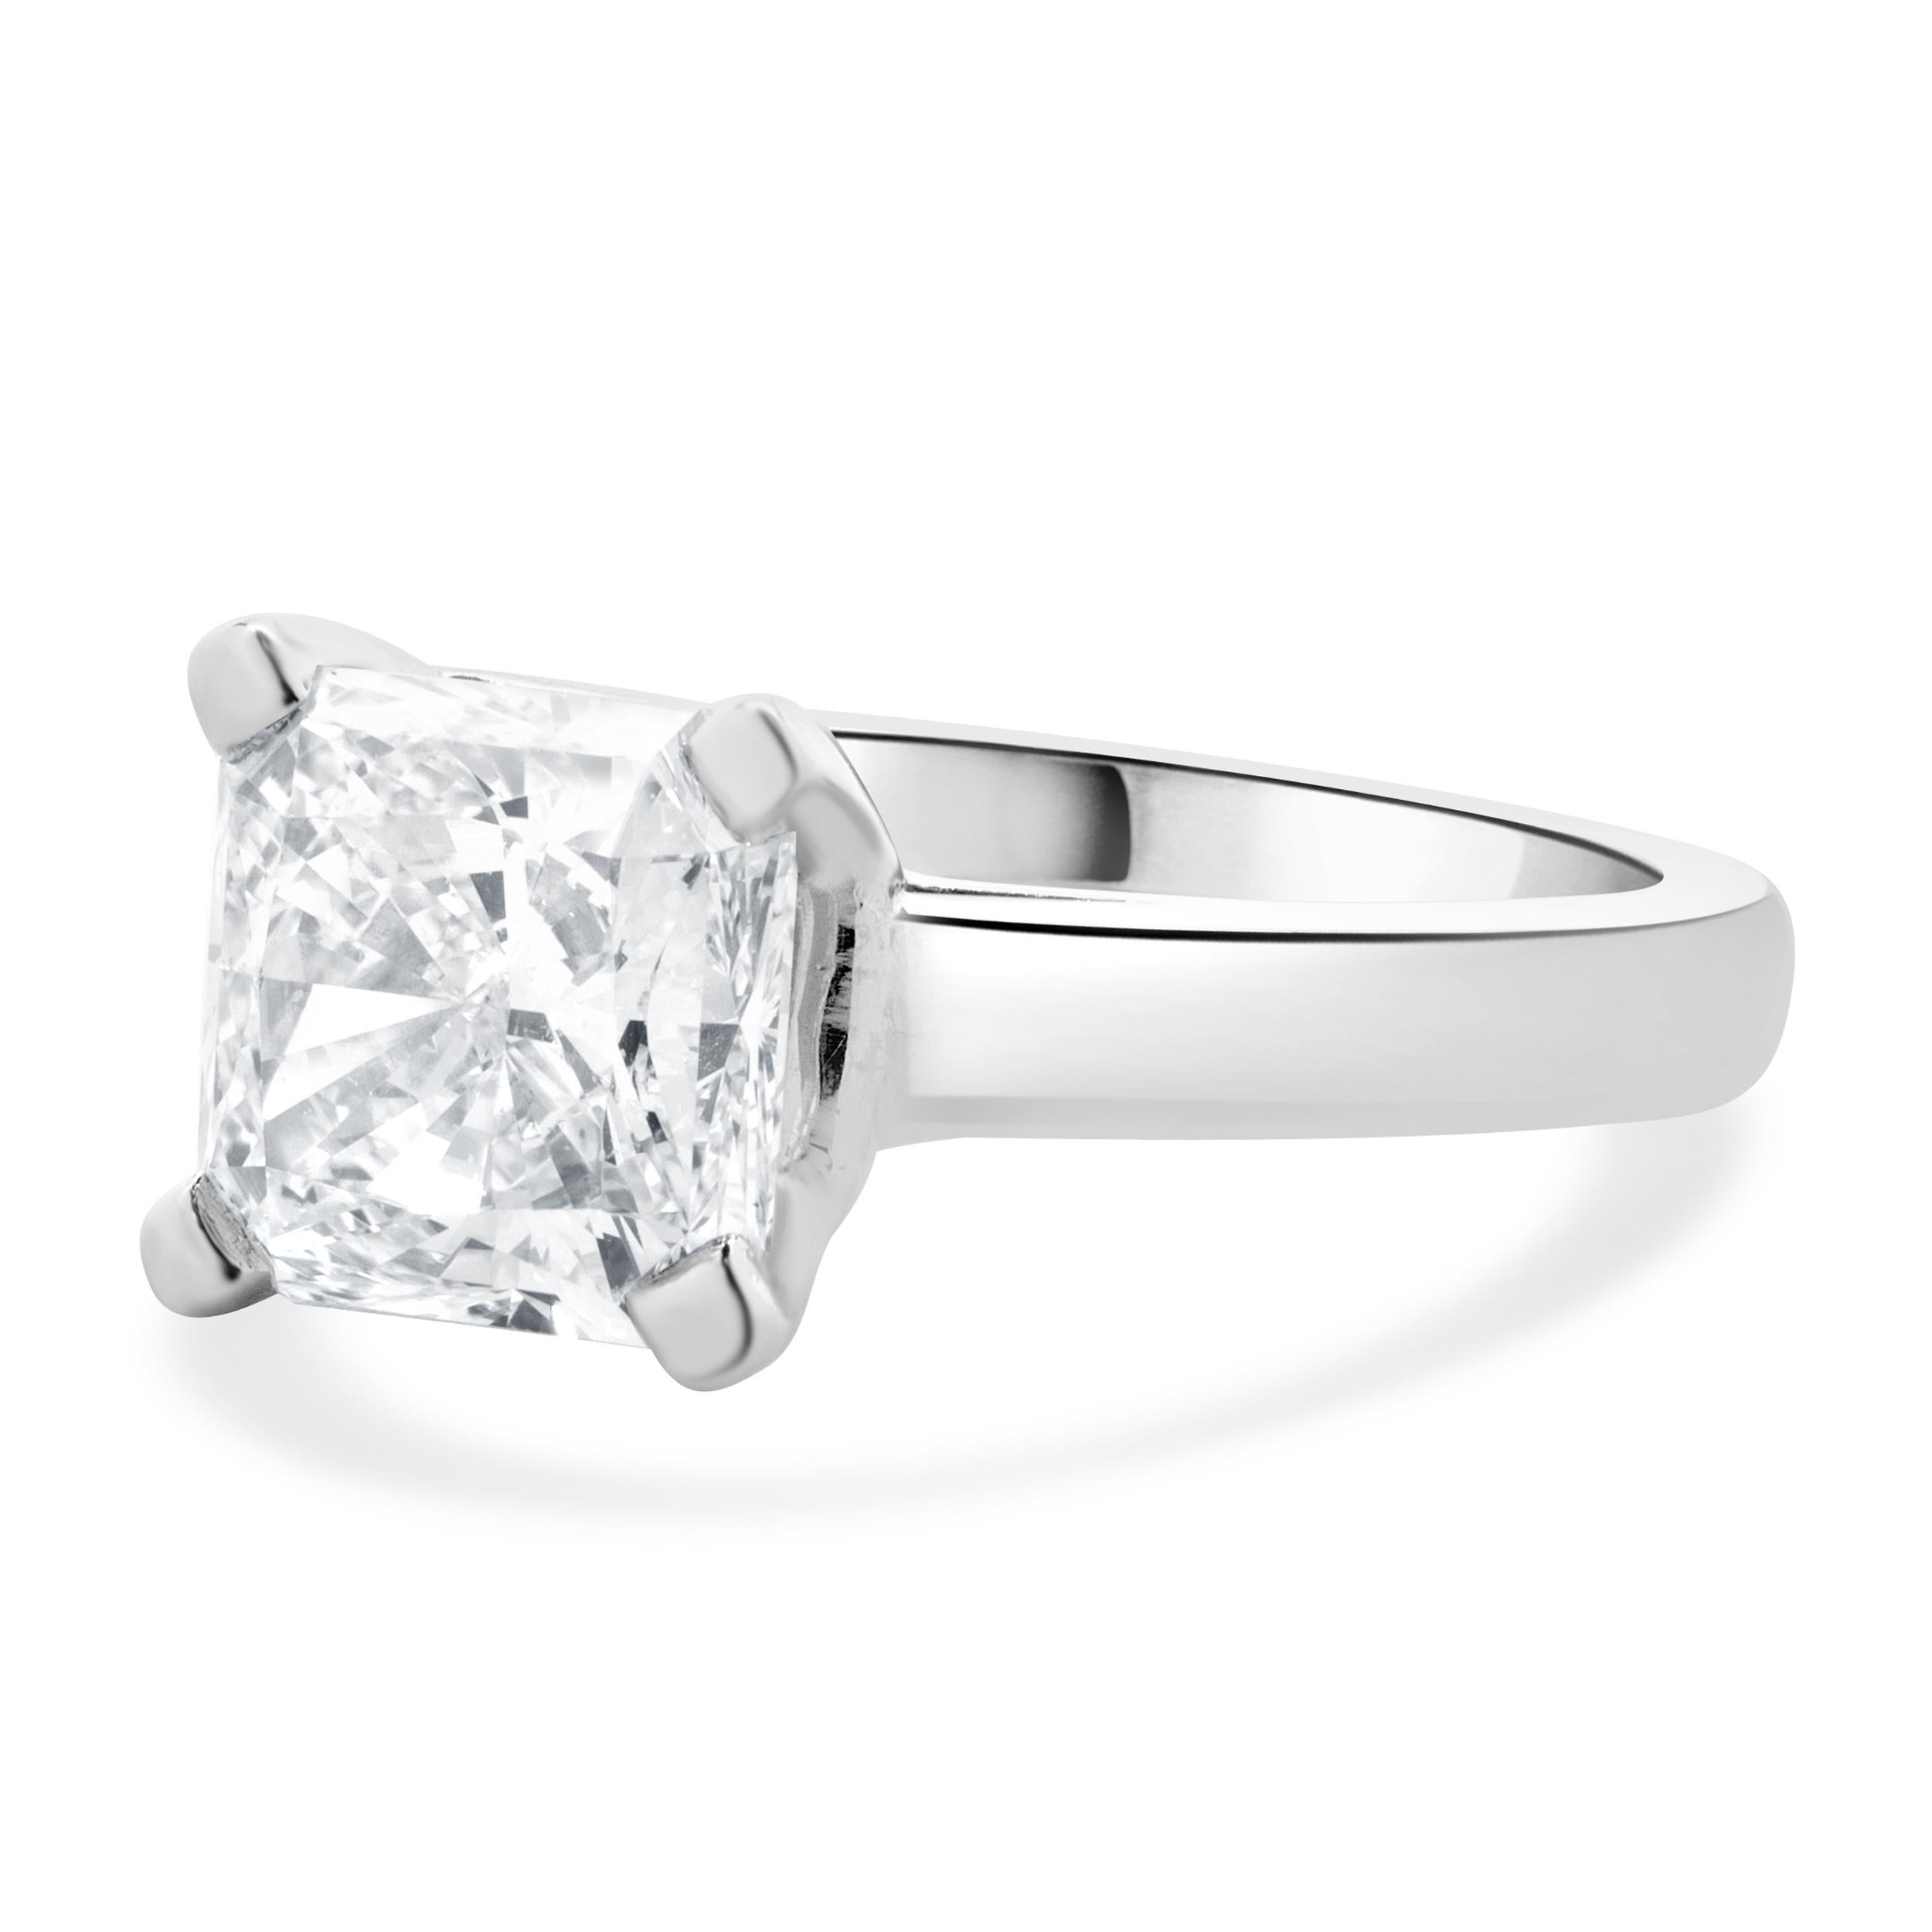 Designer: custom
Material: platinum
Diamond: 1 radiant cut = 3.24ct
Color: J
Clarity: SI1
EGL: 2961205833
Dimensions: ring top measures 9mm wide
Ring Size: 6.75 (complimentary sizing available)
Weight: 9.45 grams
